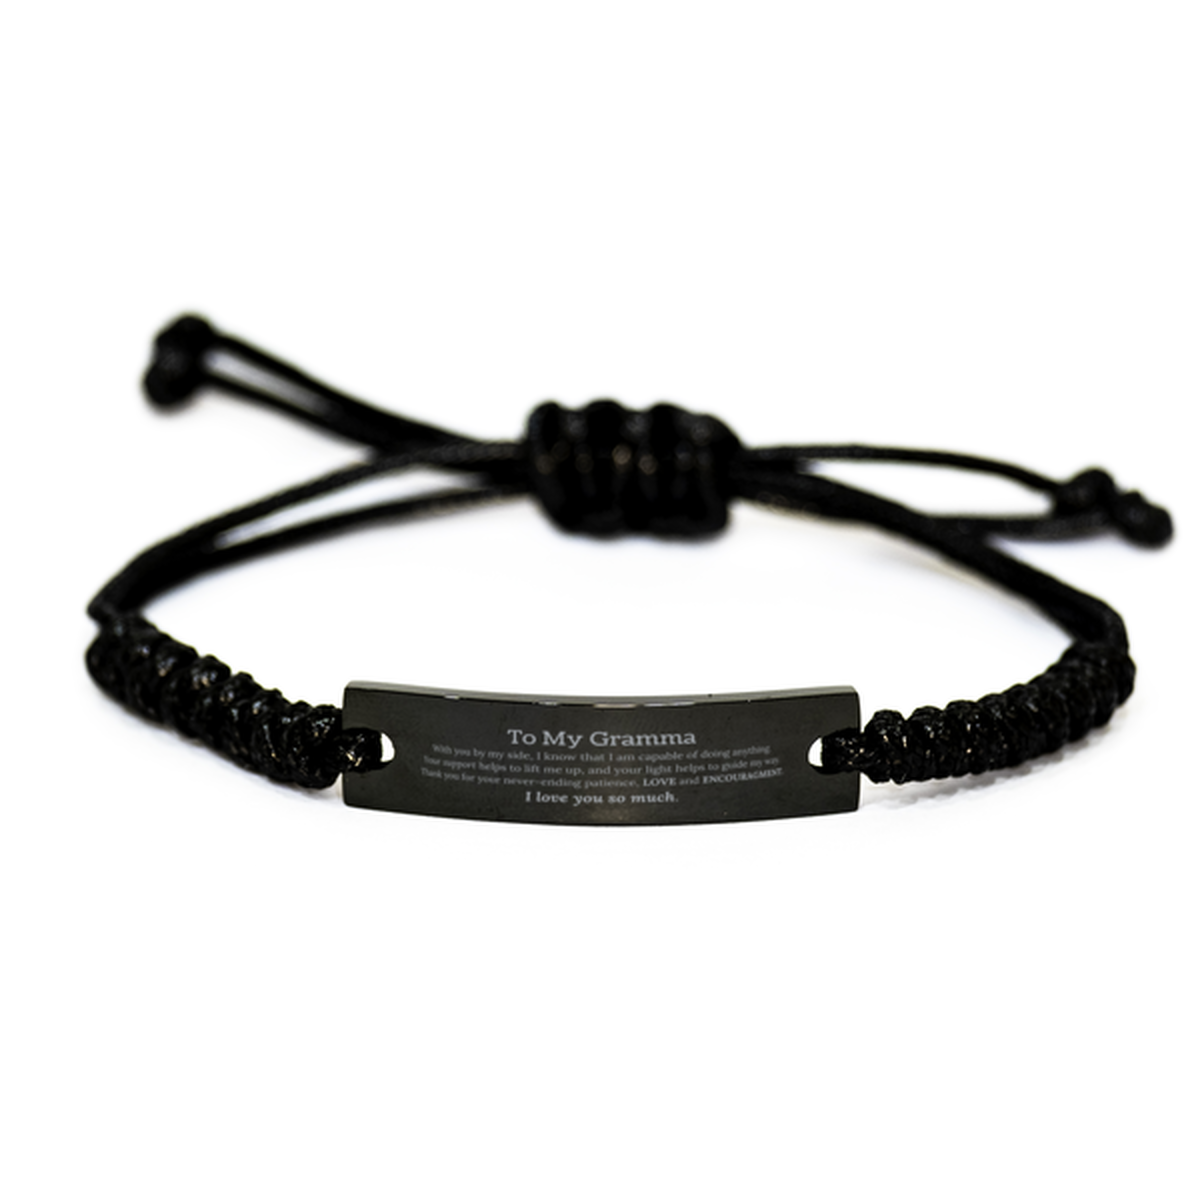 Appreciation Gramma Black Rope Bracelet Gifts, To My Gramma Birthday Christmas Wedding Keepsake Gifts for Gramma With you by my side, I know that I am capable of doing anything. I love you so much